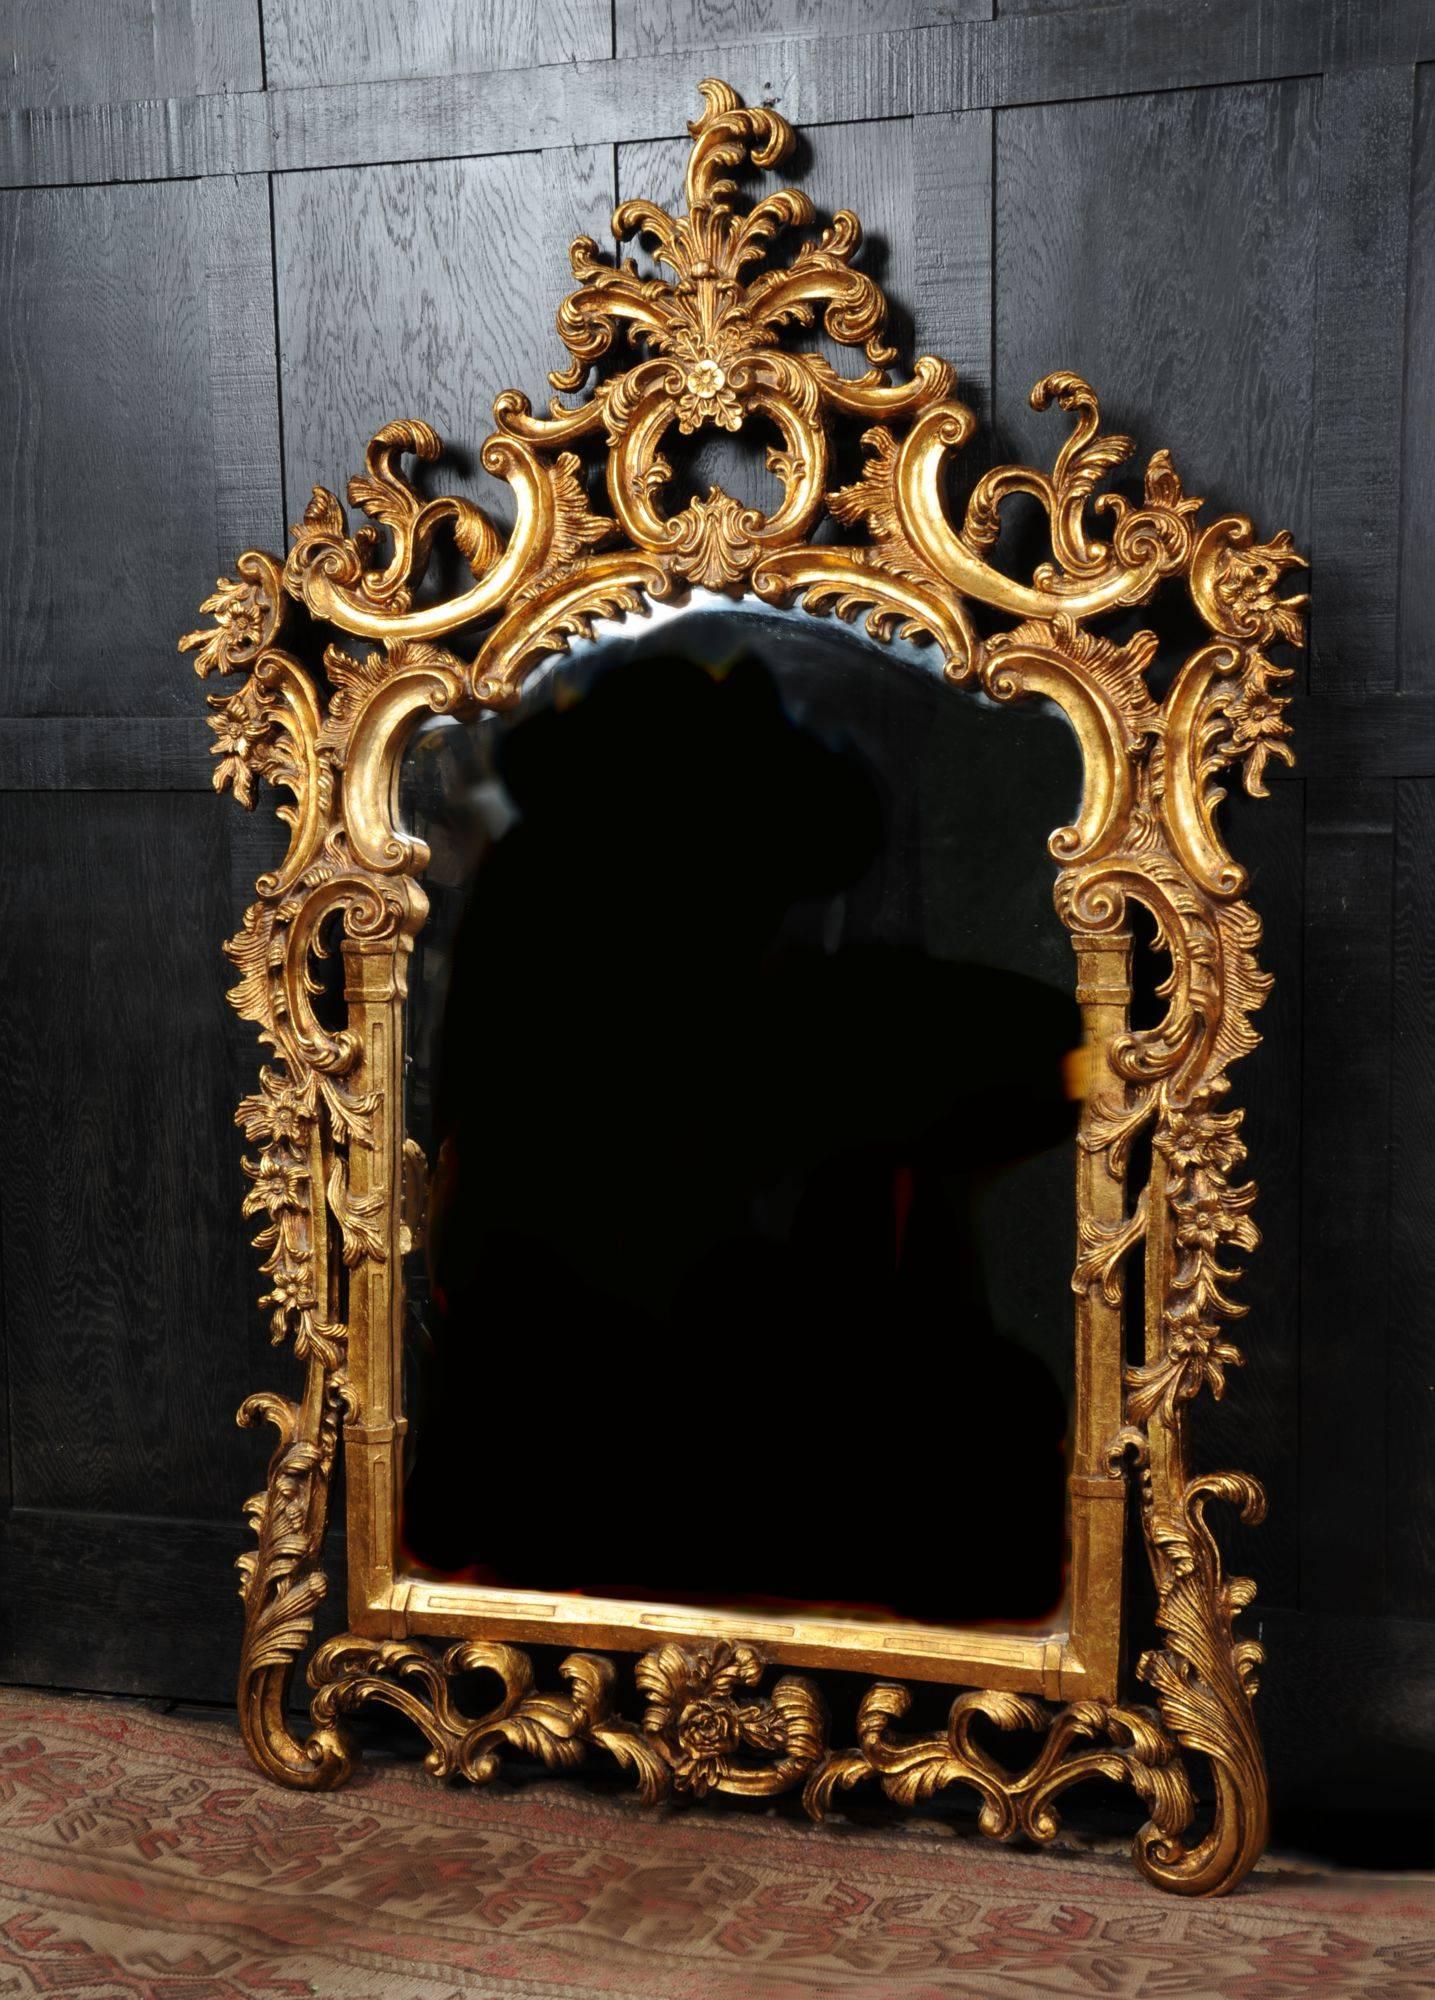 A beautiful, large carved giltwood mirror, exquisite detail with great antique look. Mirror plate is bevelled. We have a large Rococo console table also available that goes very well with this mirror.